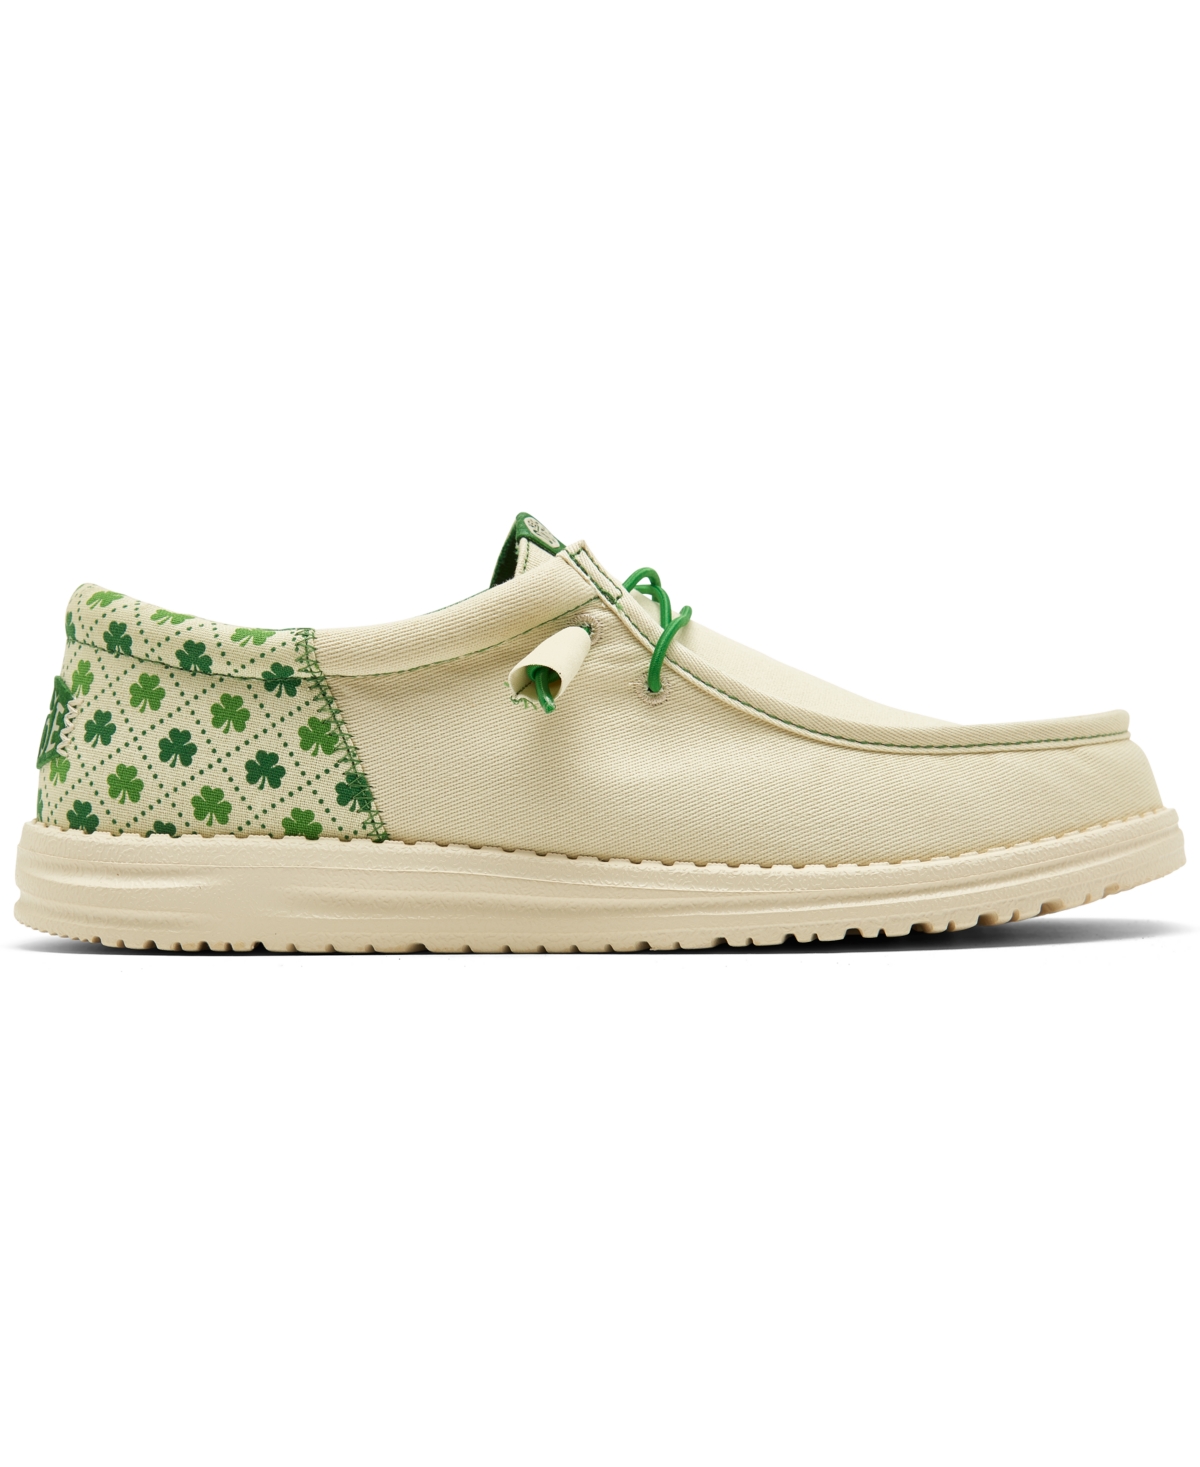 Shop Hey Dude Men's Wally Funk Luck Slip-on Casual Sneakers From Finish Line In White,shamrock